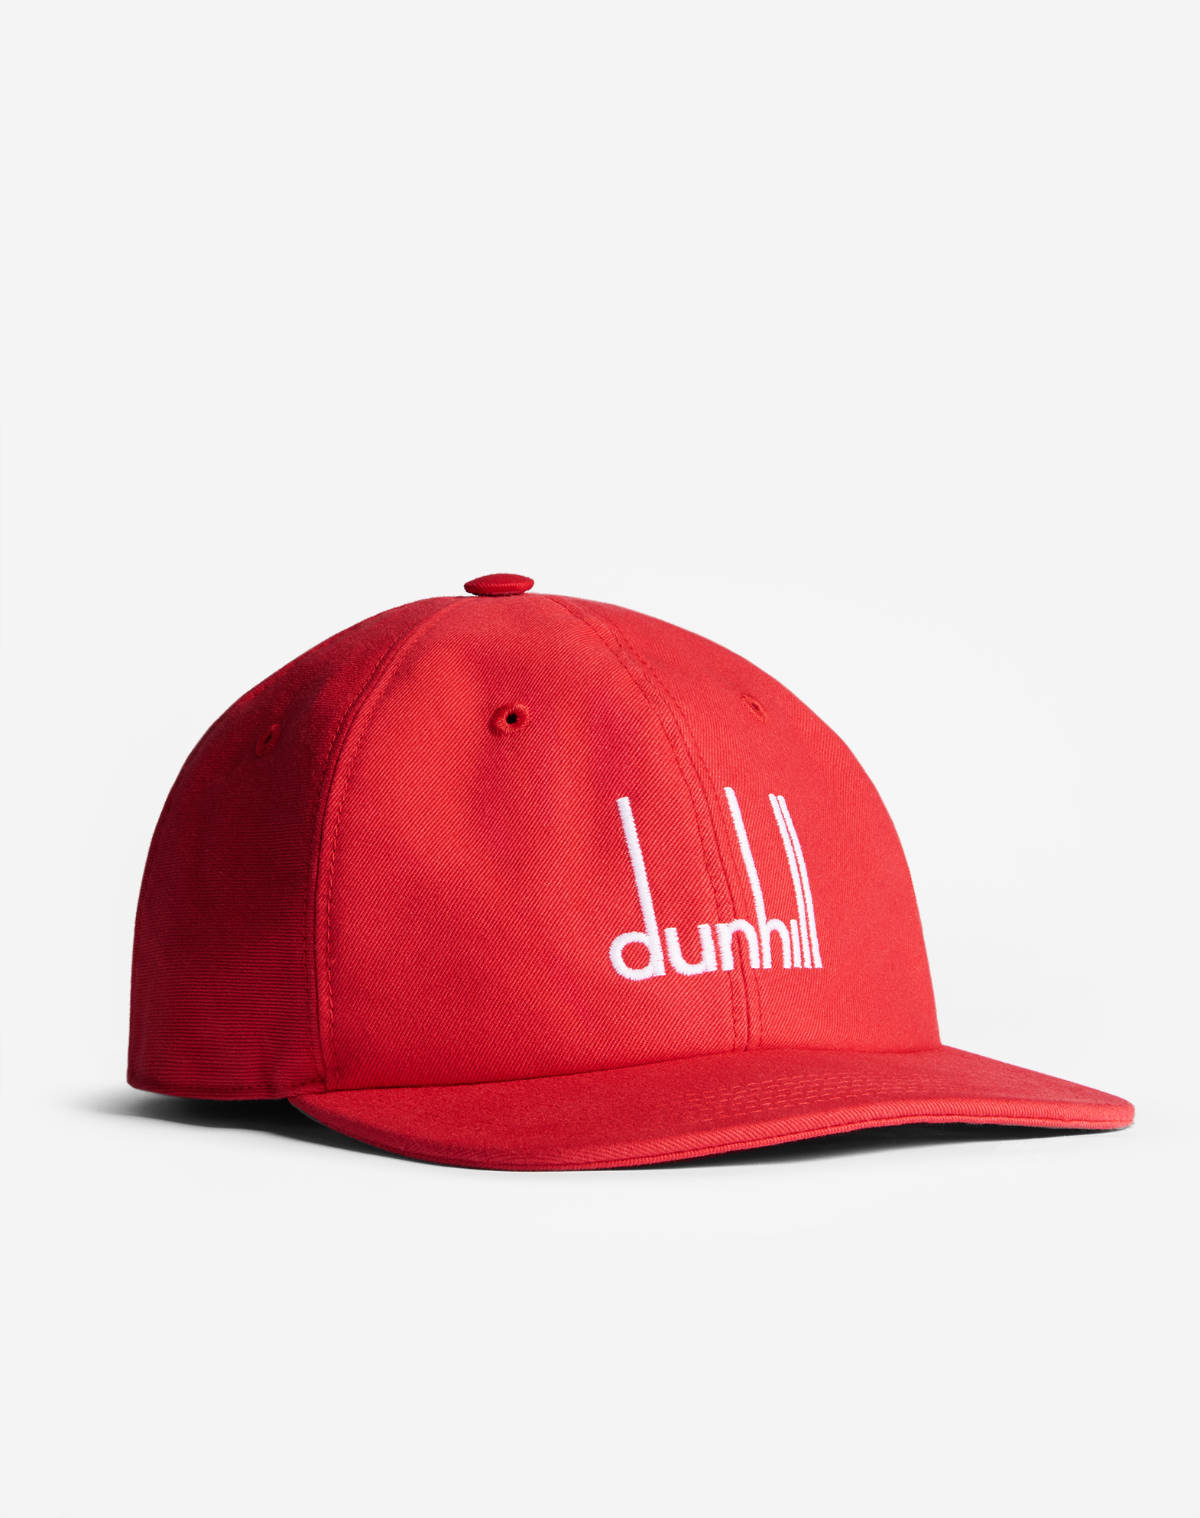 'dunhill Compendium', The New Autumn Winter 2021 Collection